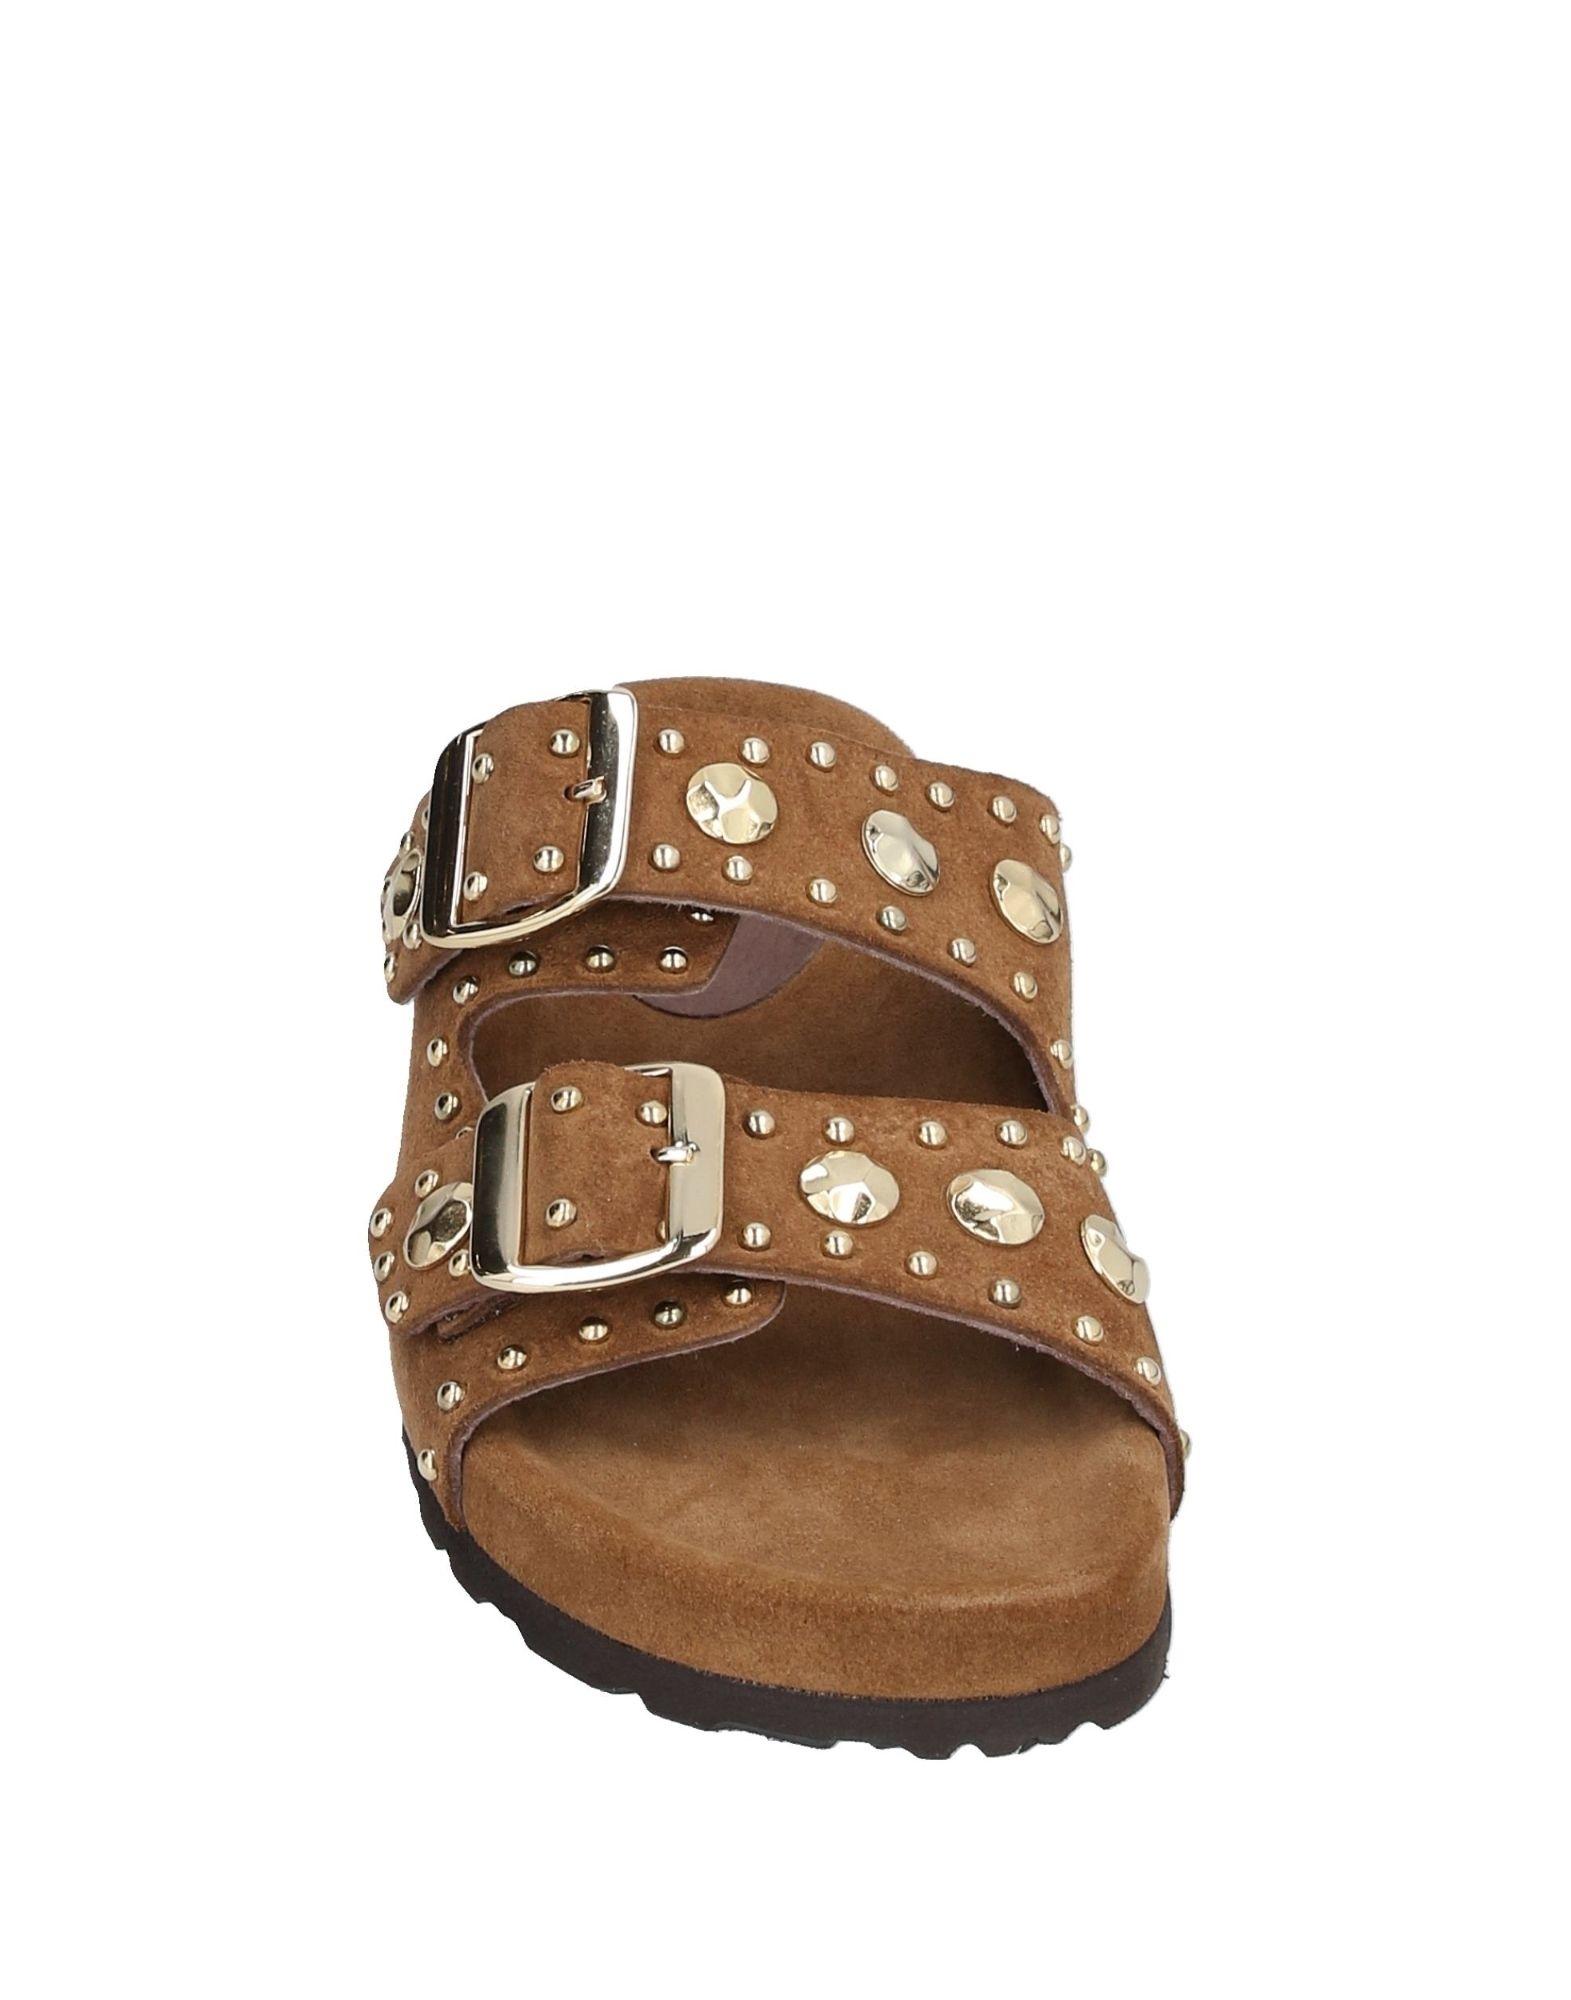 maje leather sandals decorated with studs